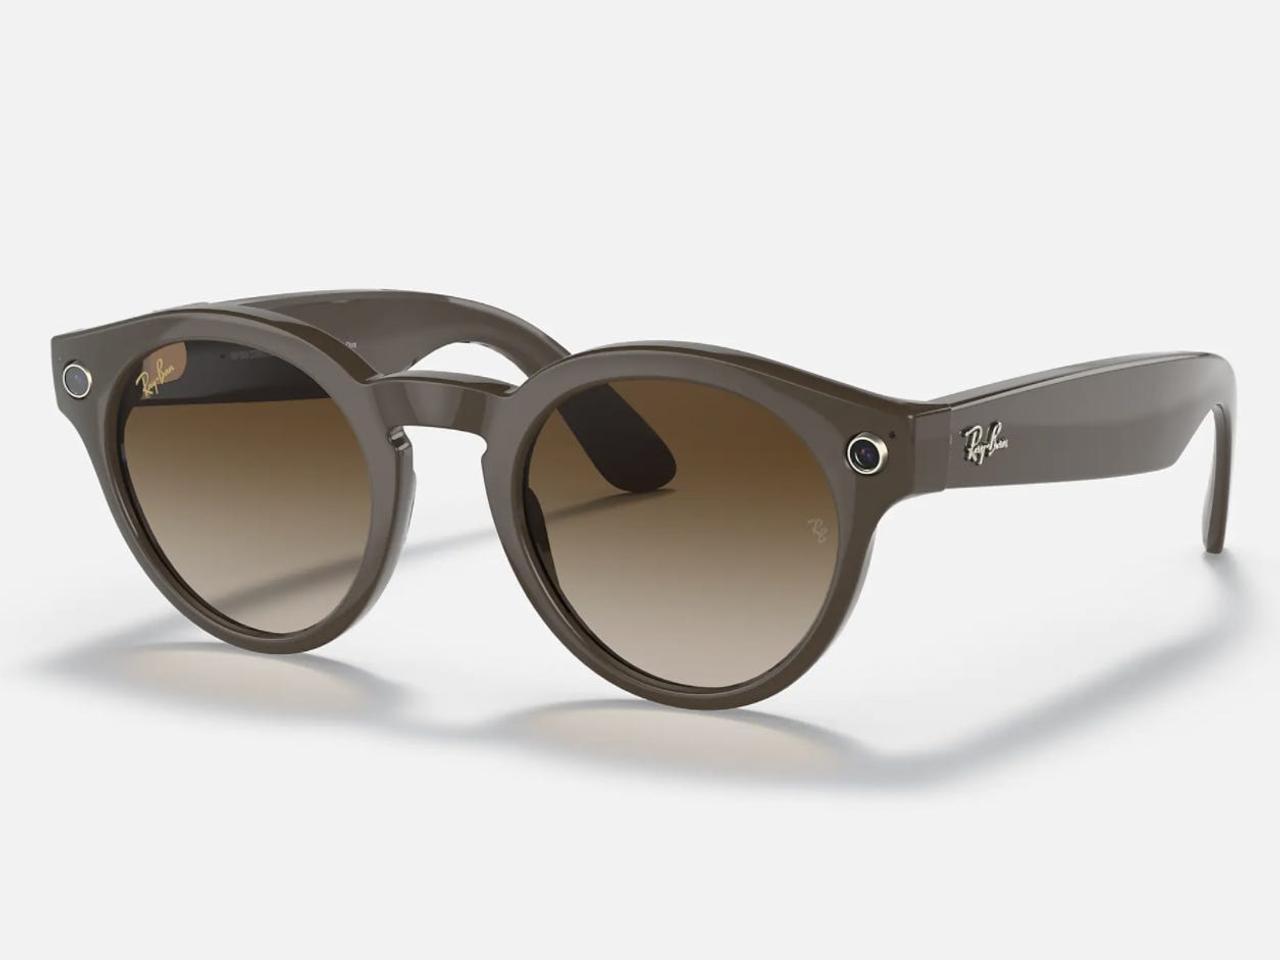 Facebook's Ray-Ban Stories smart glasses, starting at $299.